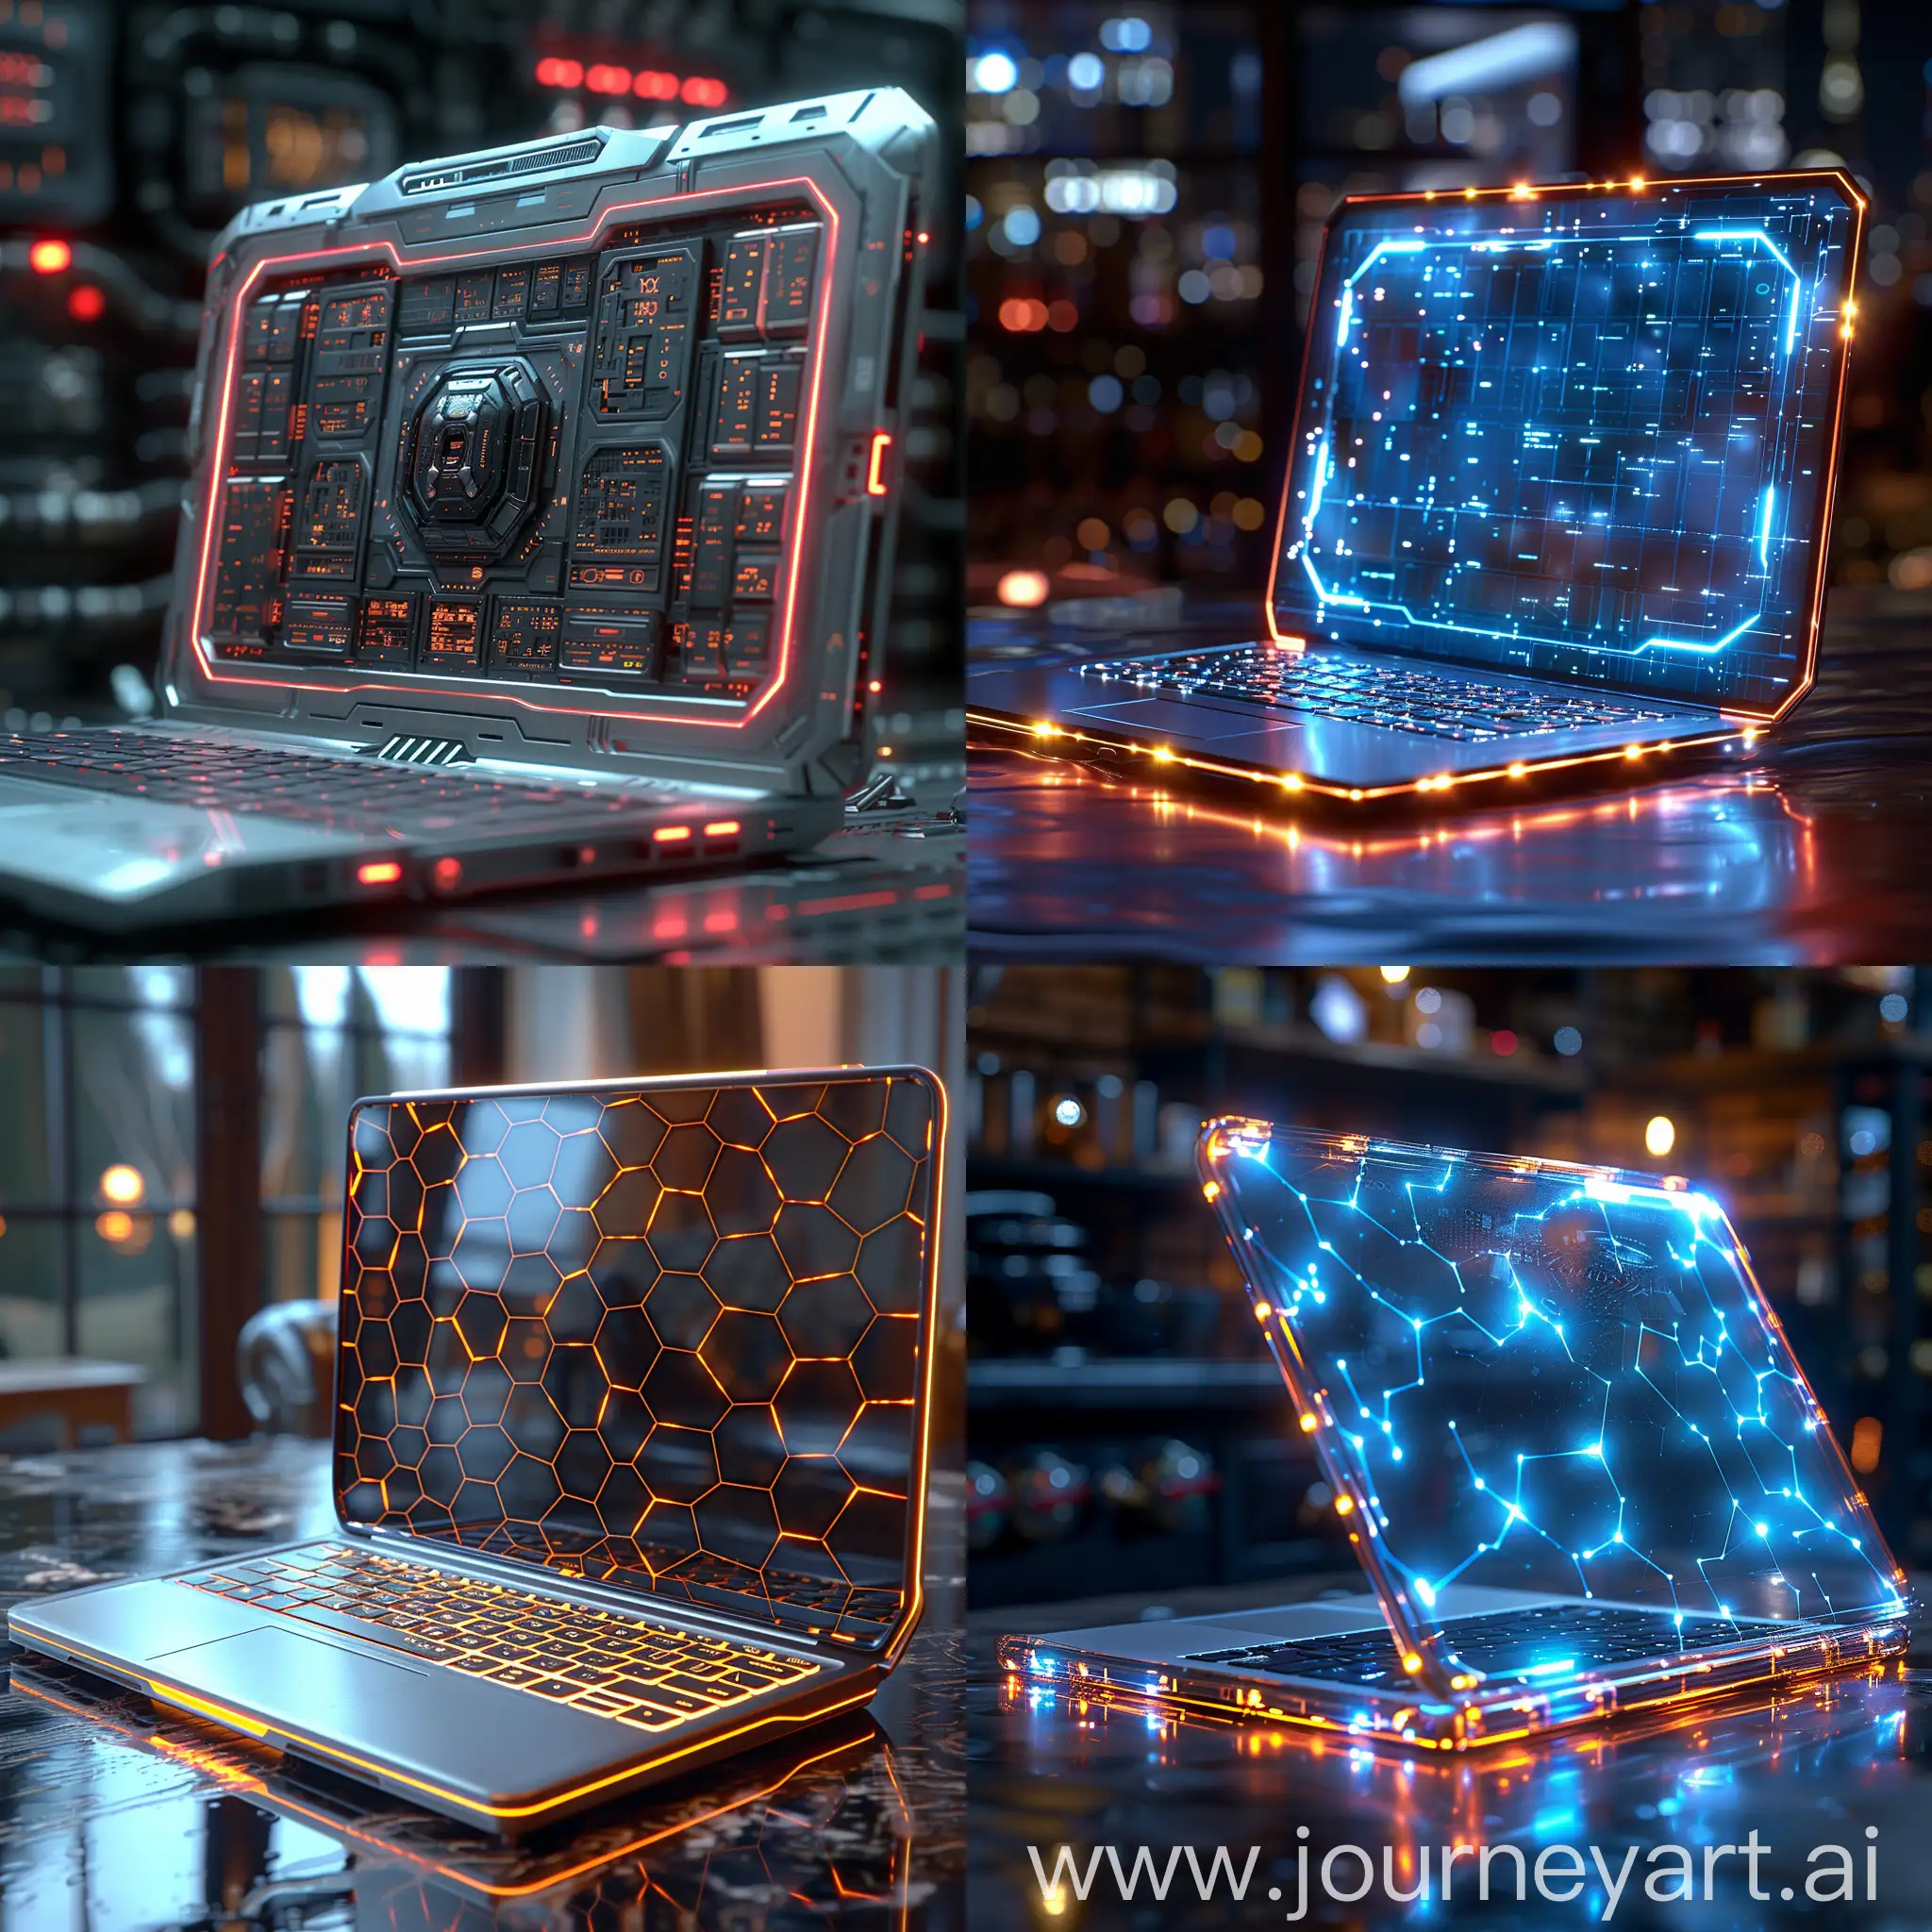 Futuristic-Laptop-with-Sustainable-Materials-EnergyEfficient-Components-and-Solar-Panel-Integration